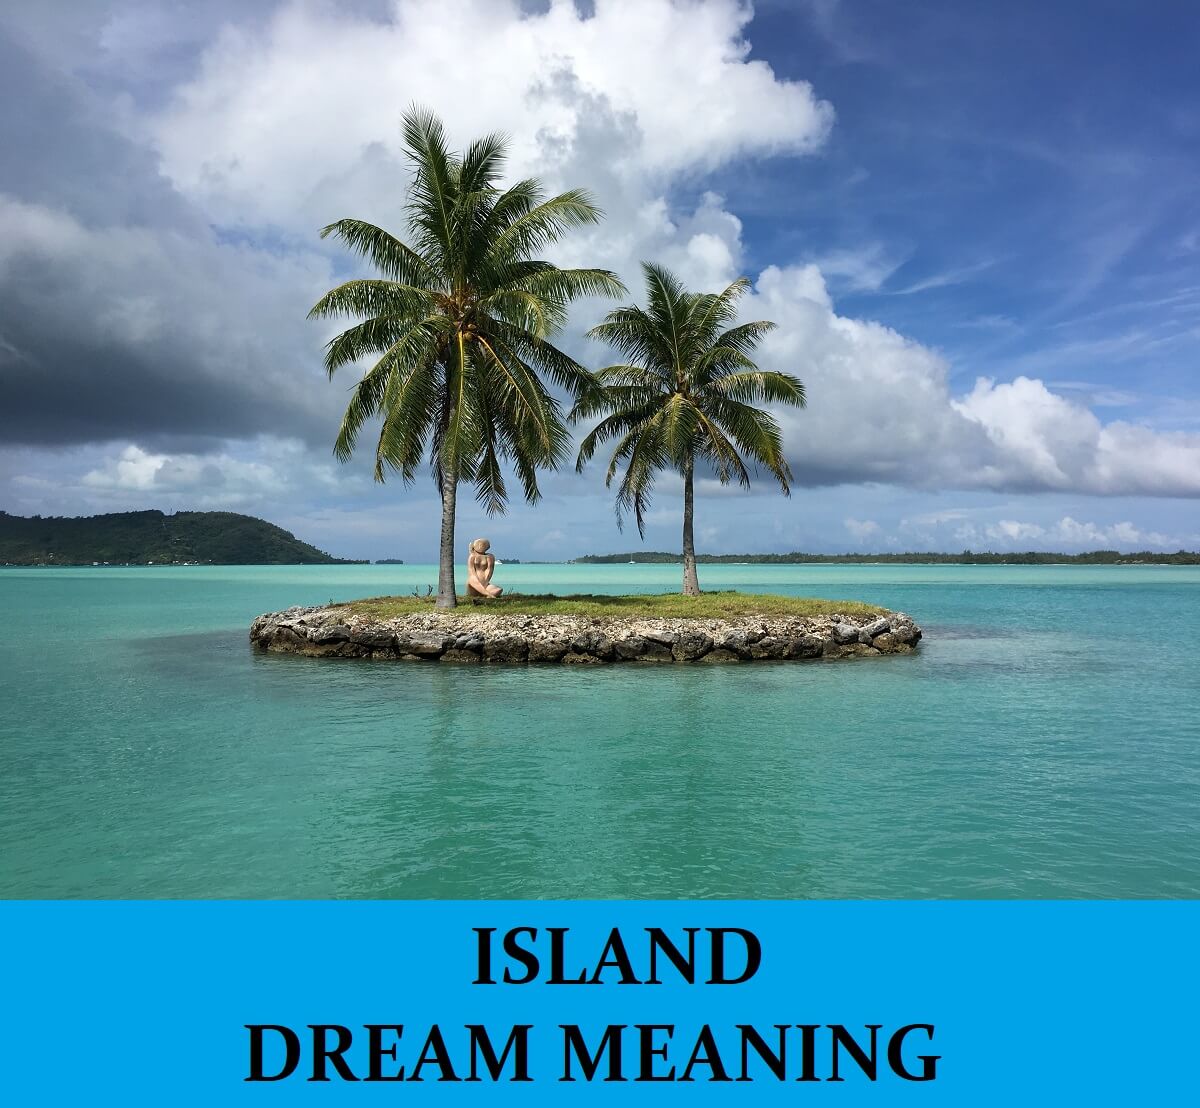 Themes Associated With Island Dreams